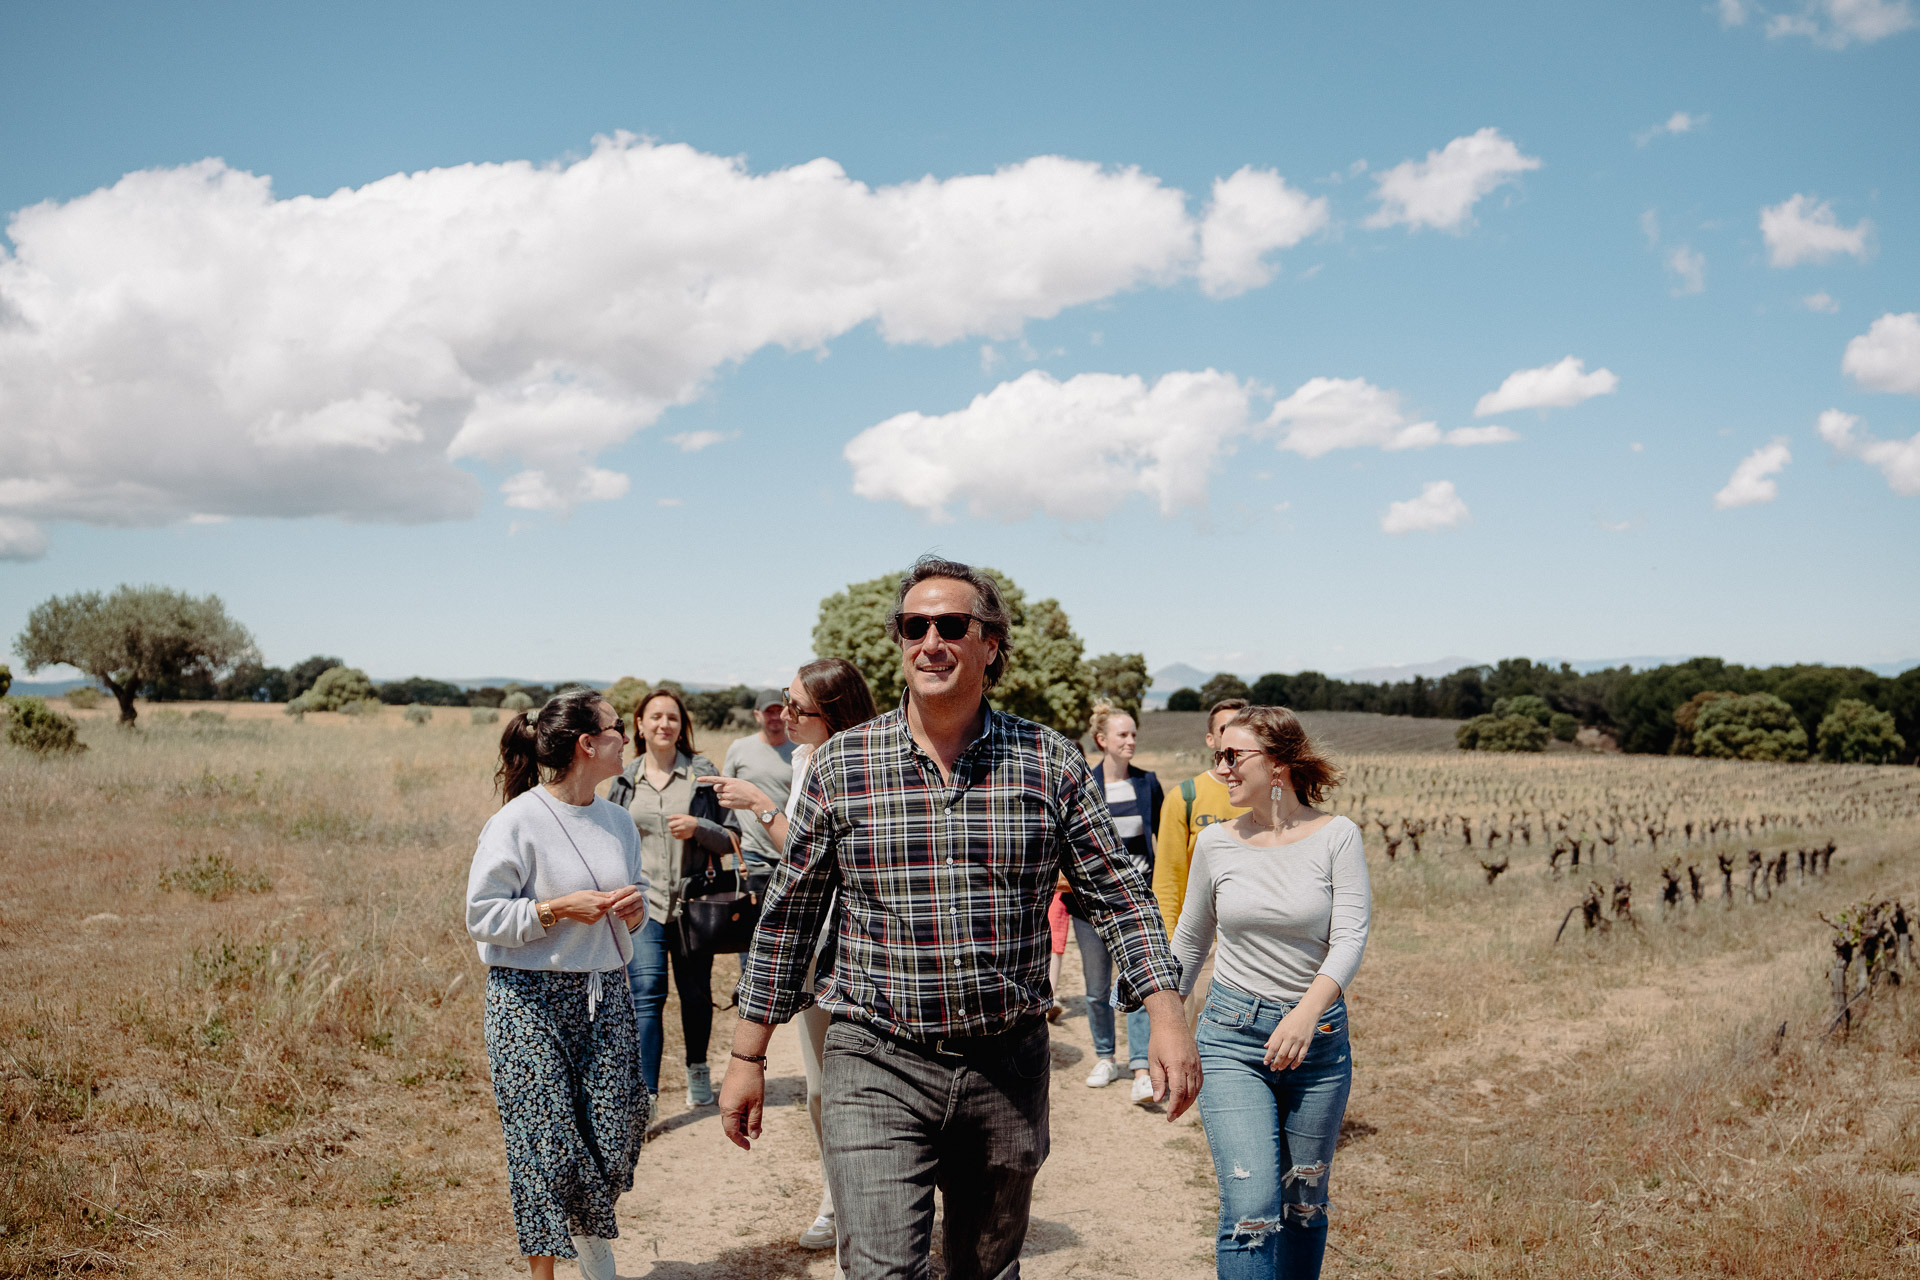 Winemaker leads a group of guests through the vineyards in early spring at an outdoor location in Spain